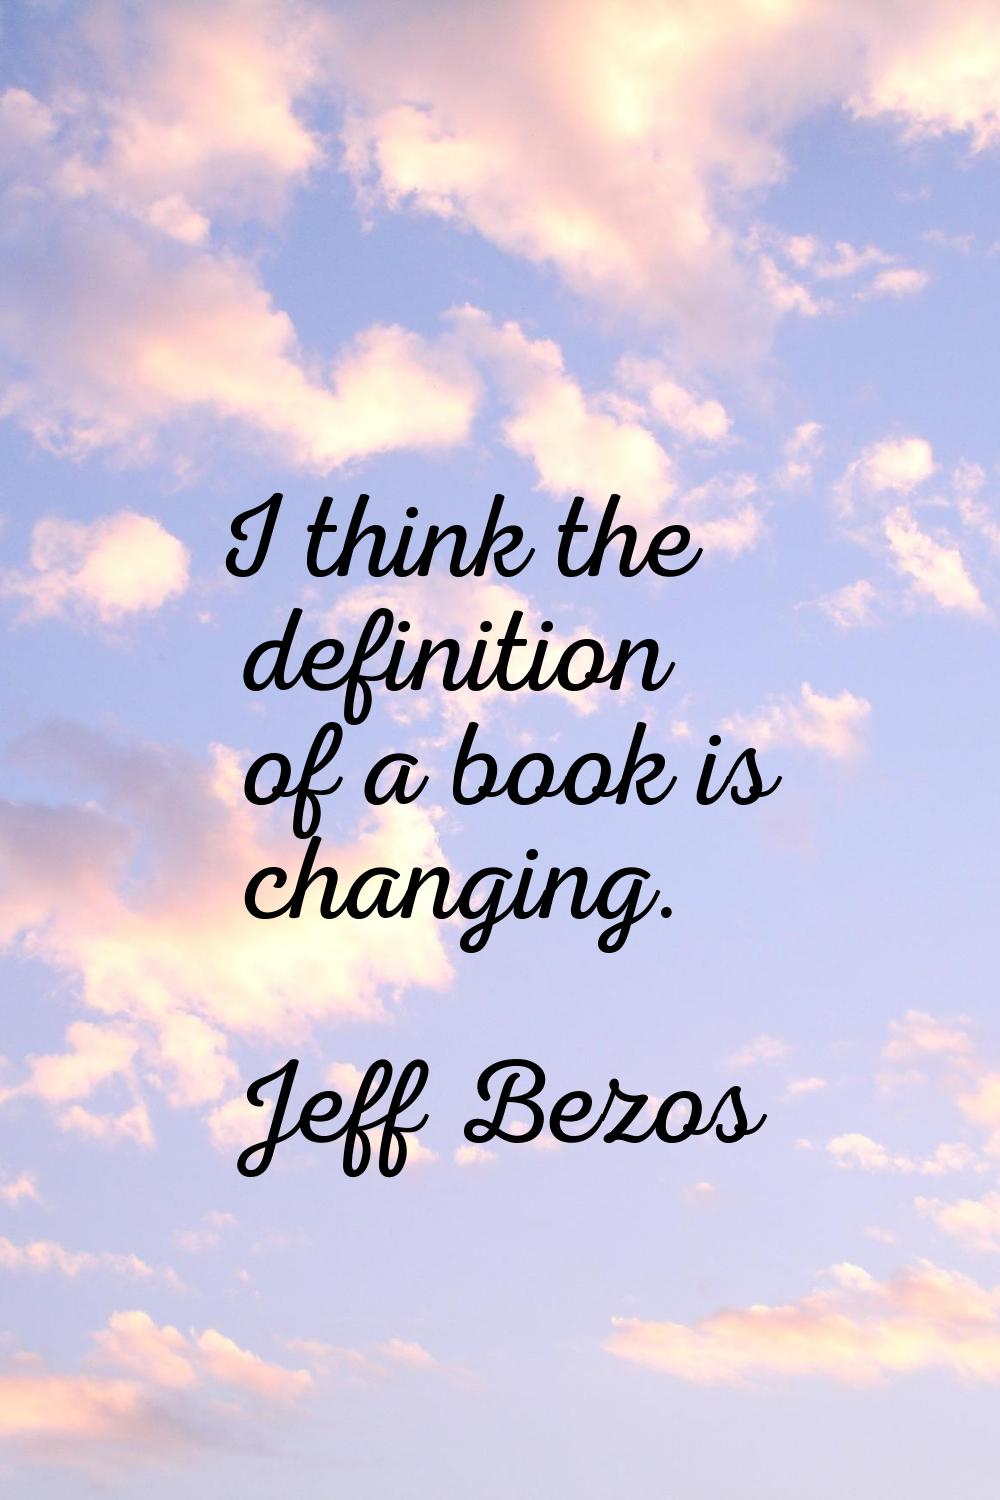 I think the definition of a book is changing.